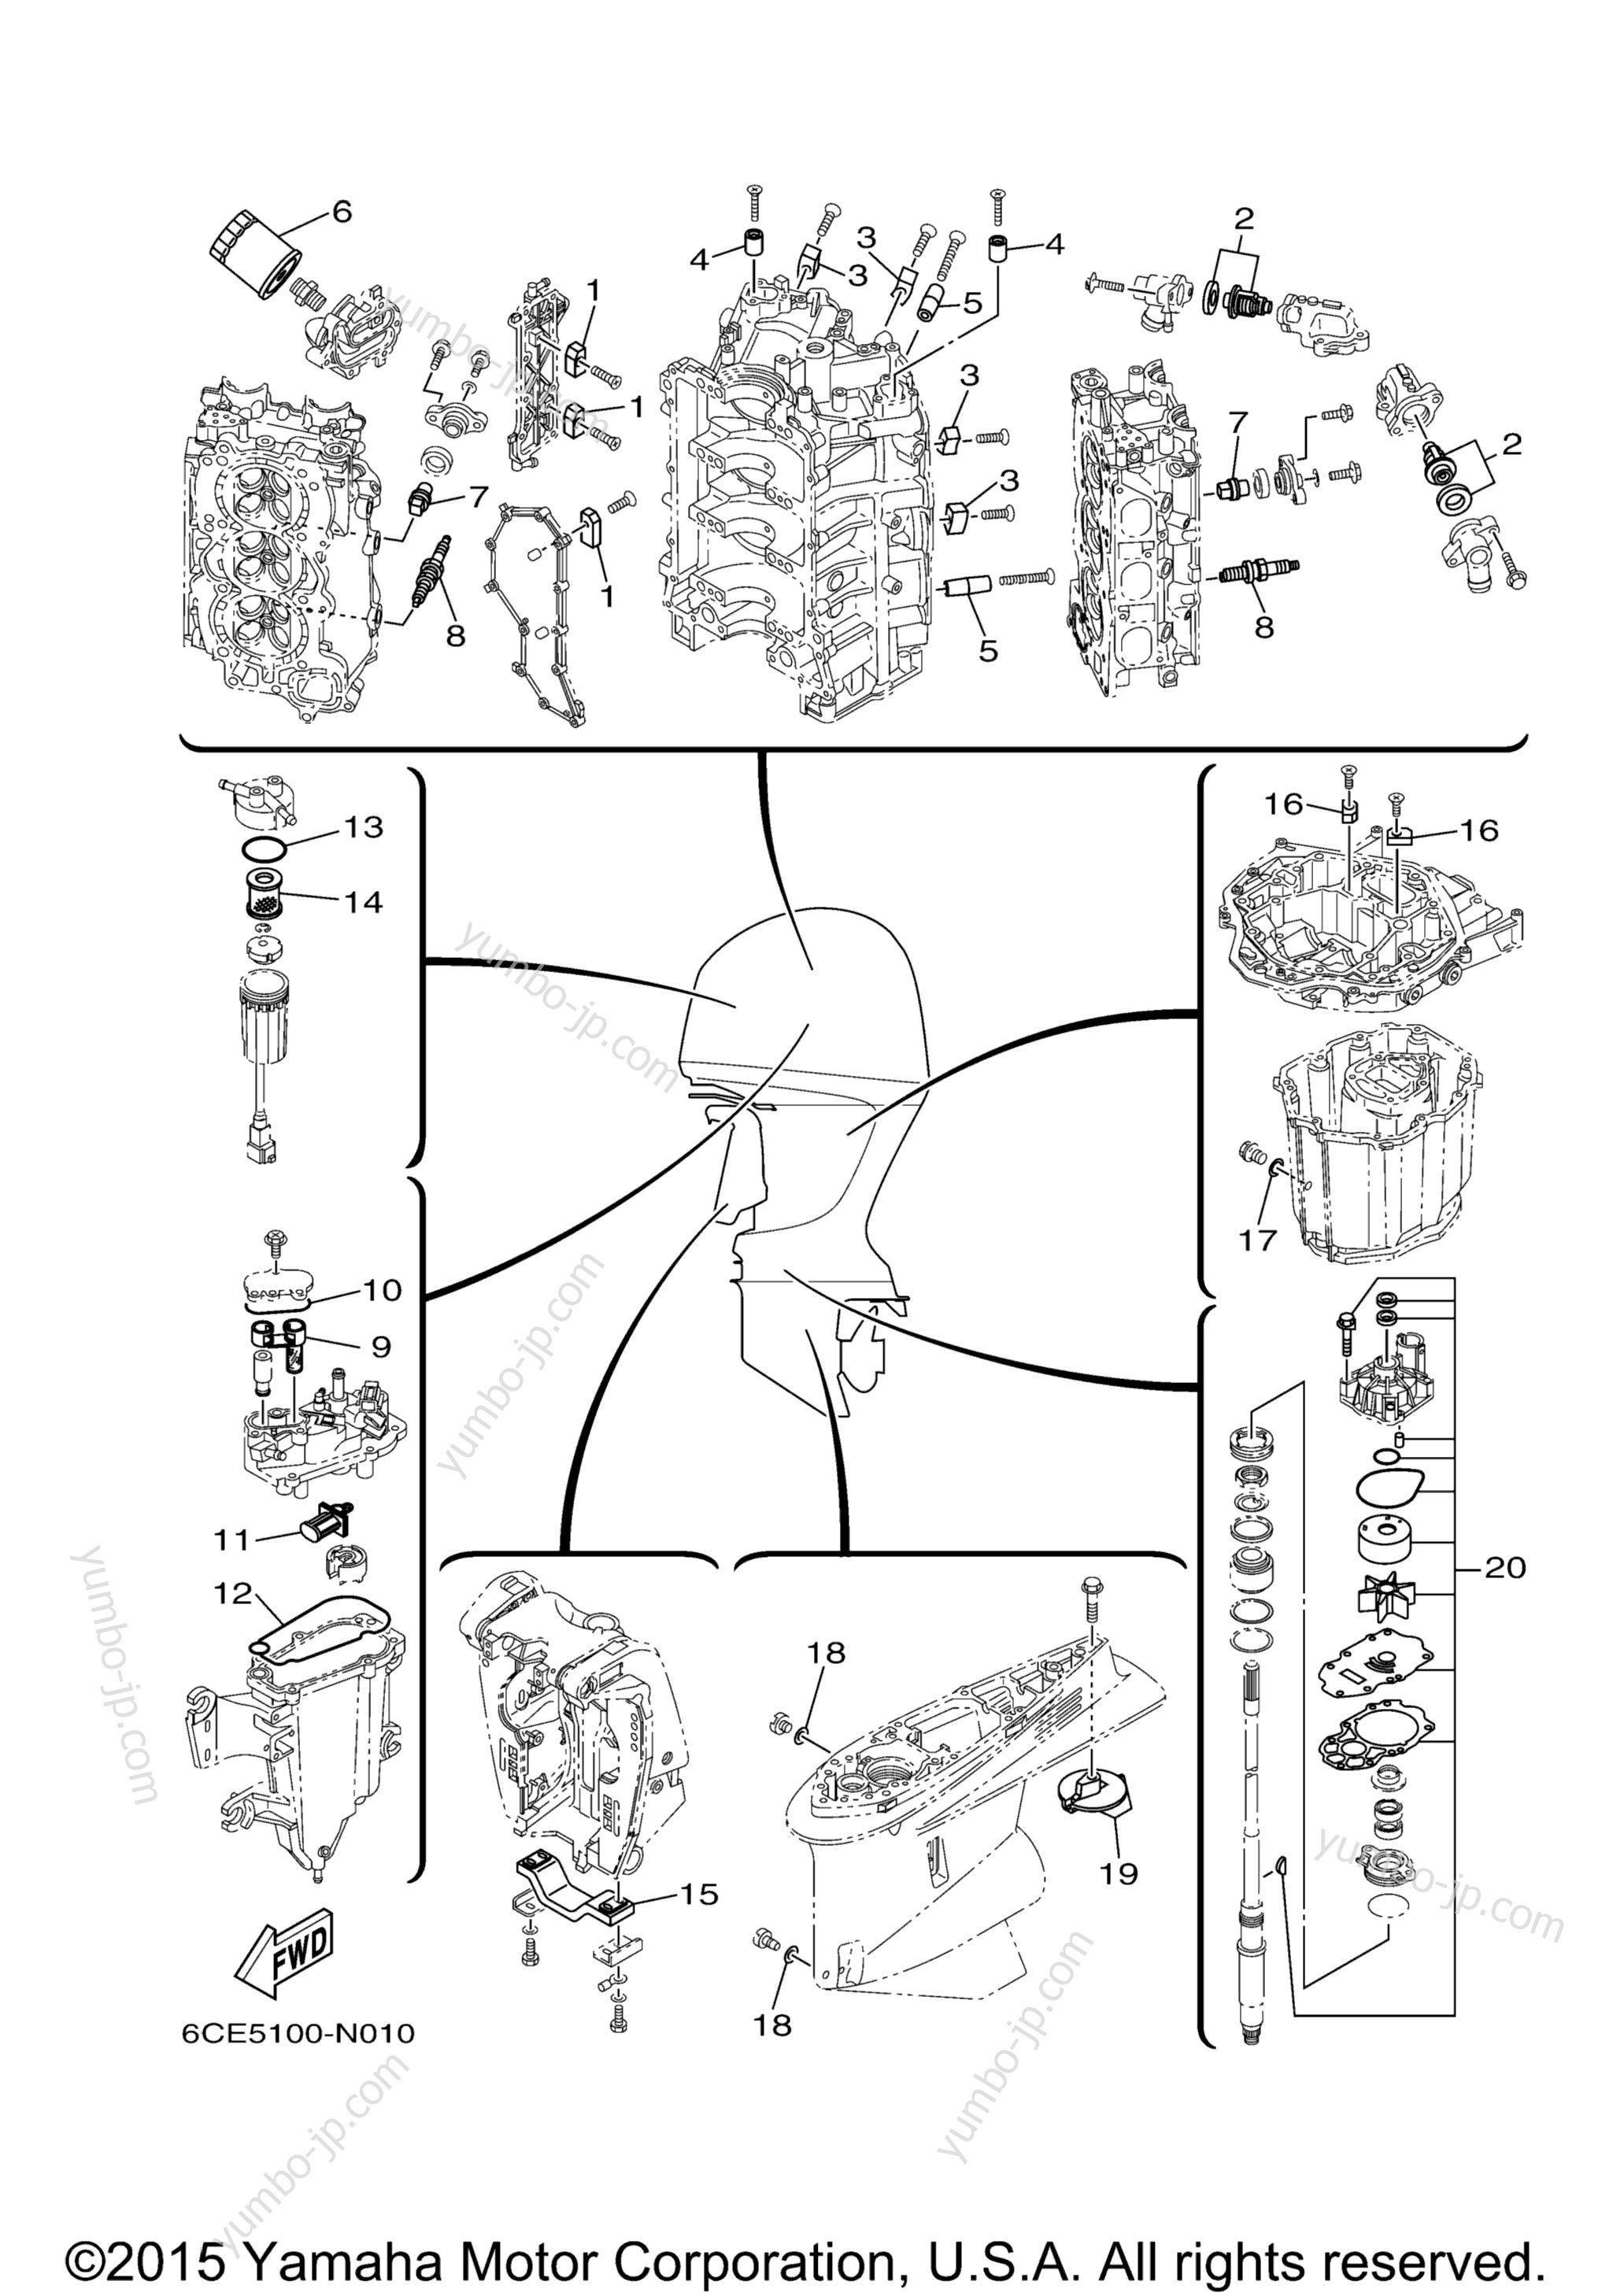 Scheduled Service Parts for outboards YAMAHA LF300XCA (0115) 2006 year